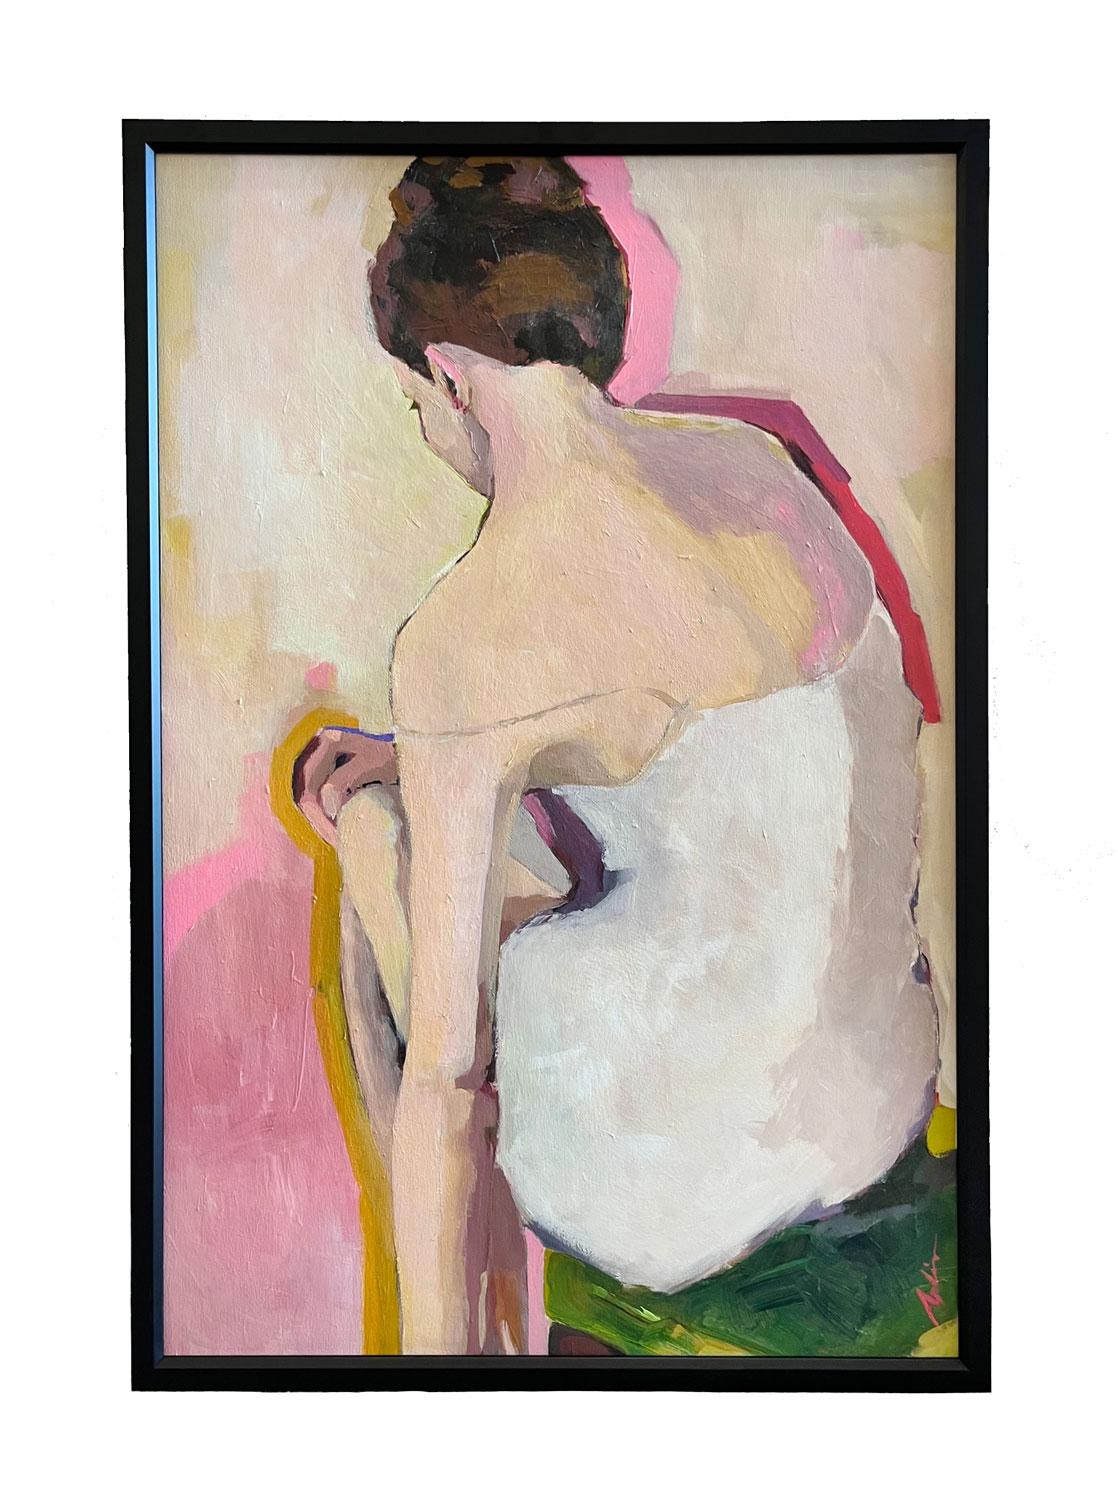 Joanna Aplin Figurative Painting - Days End, female figure in pink and white with white dress painted from the back